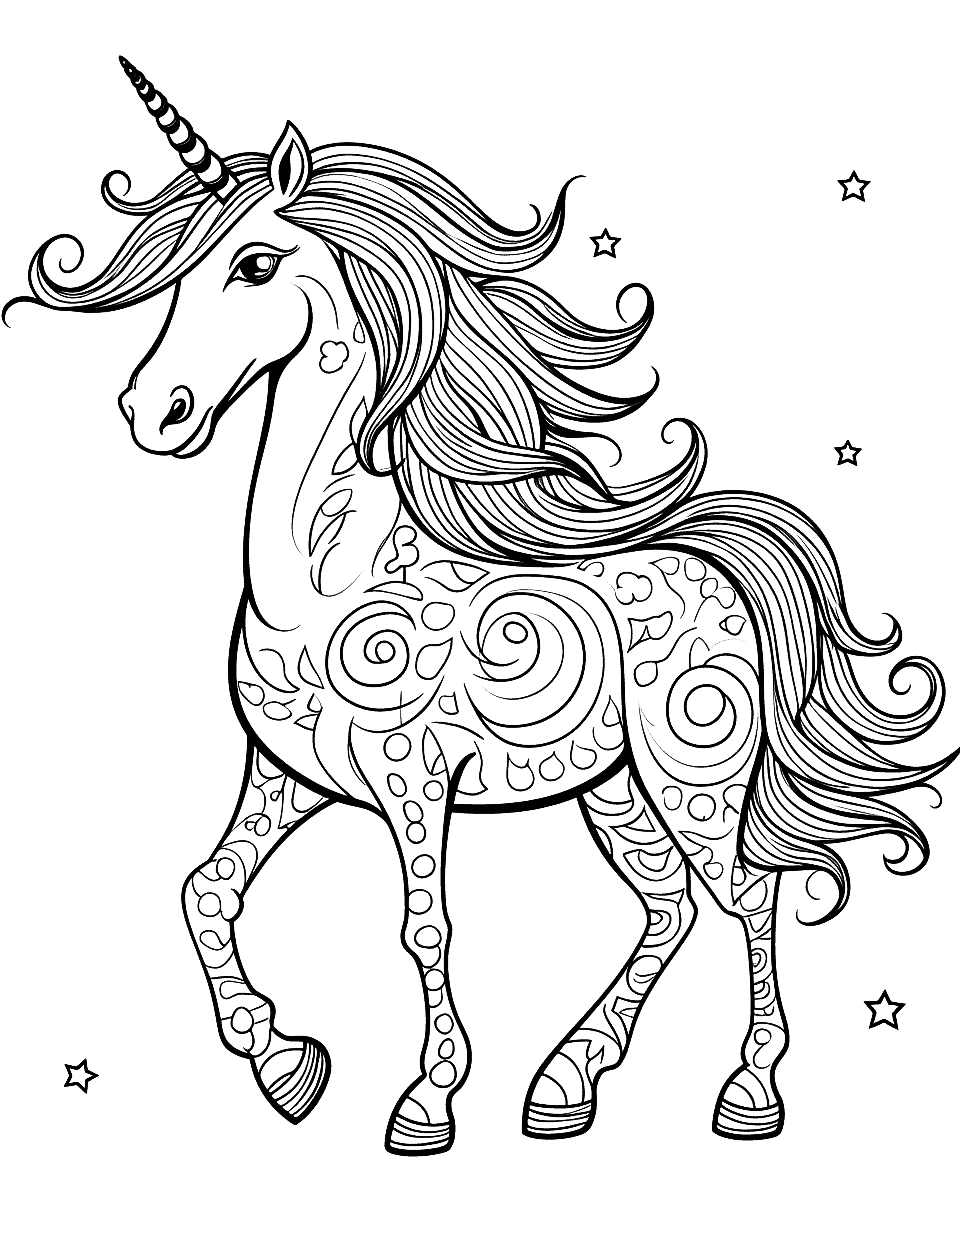 Zentangle Unicorn Coloring Page - A detailed zentangle patterned unicorn, perfect for advanced colorers looking for a challenge.